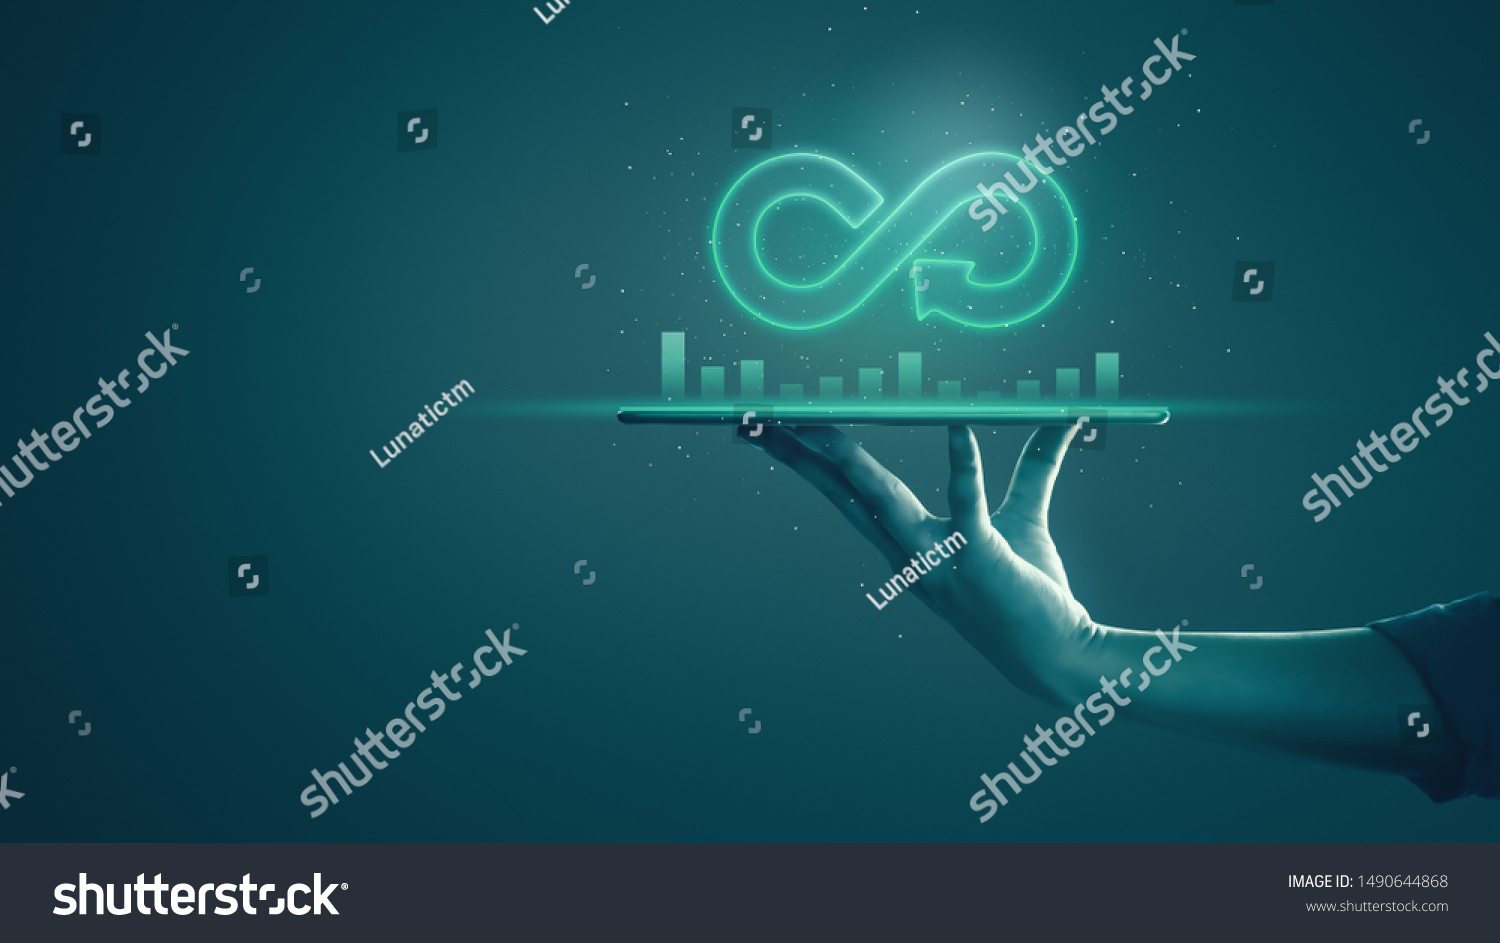 Circular economy with infinite concept. Business man showing arrow infinity symbol with neon light and dark background. Graph showing the earnings, profits of business shares in good feedback. #1490644868